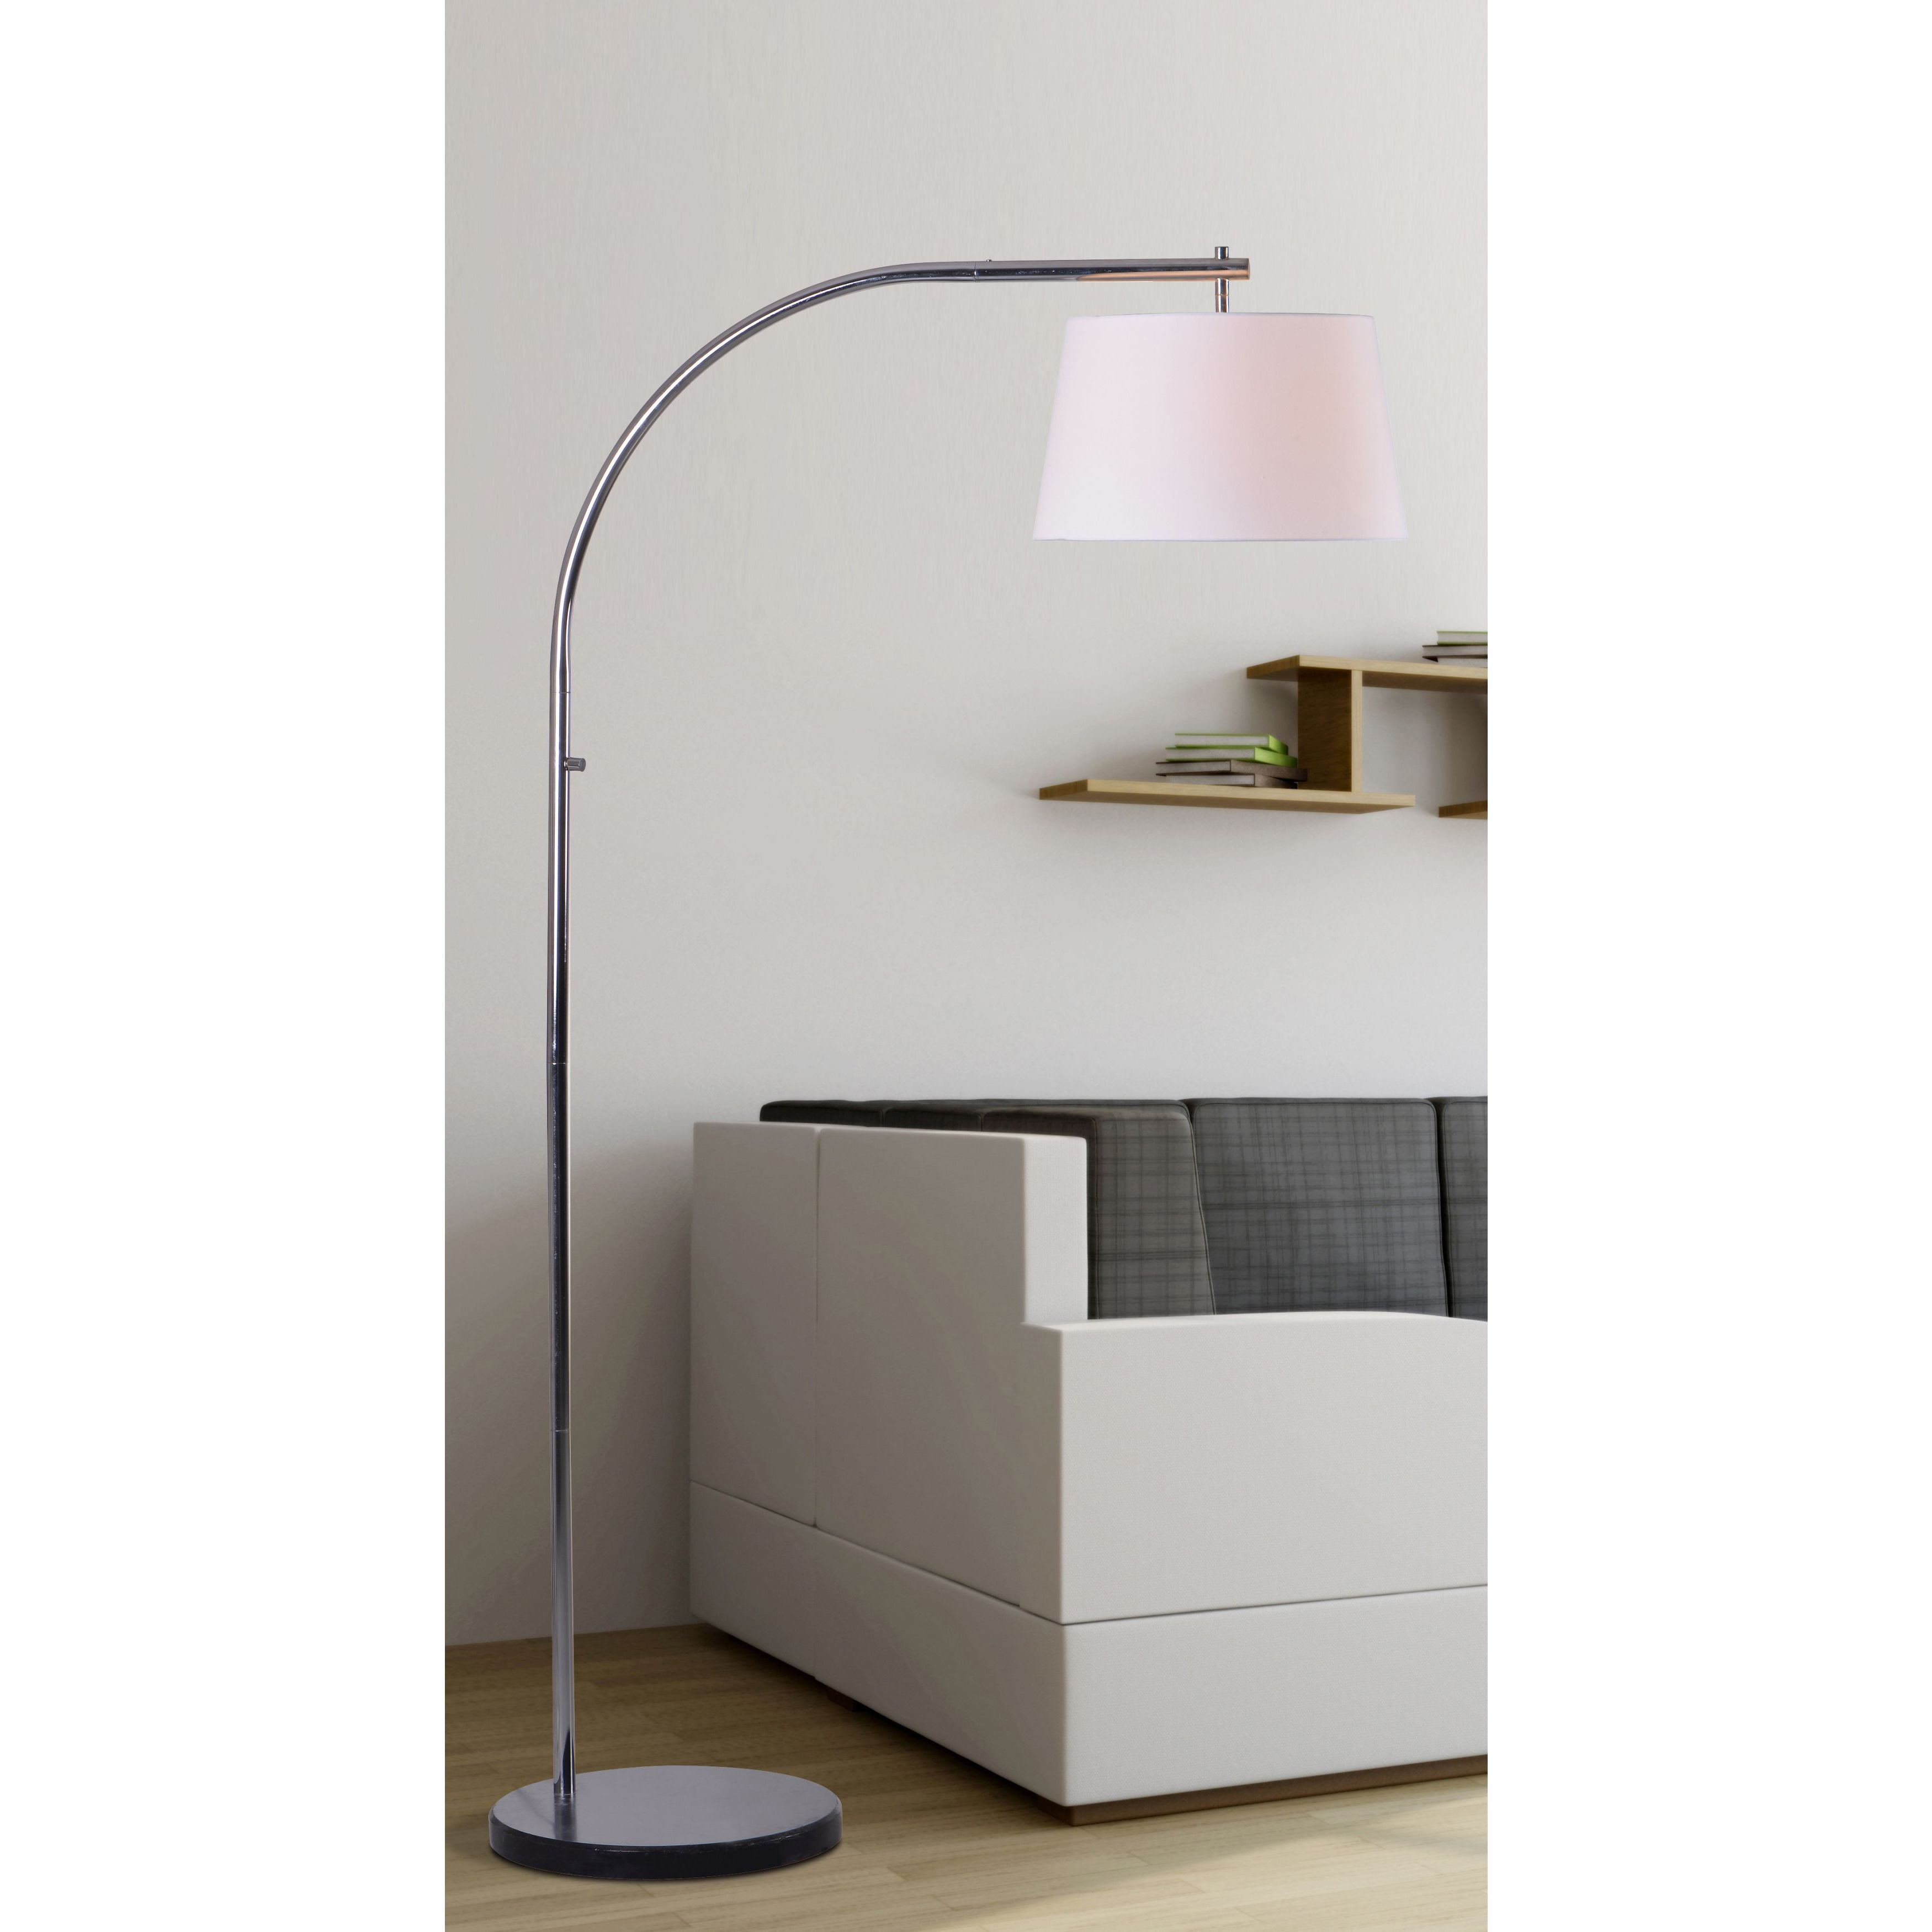 Bend 70 Inch Arc Floor Lamp pertaining to size 3500 X 3500